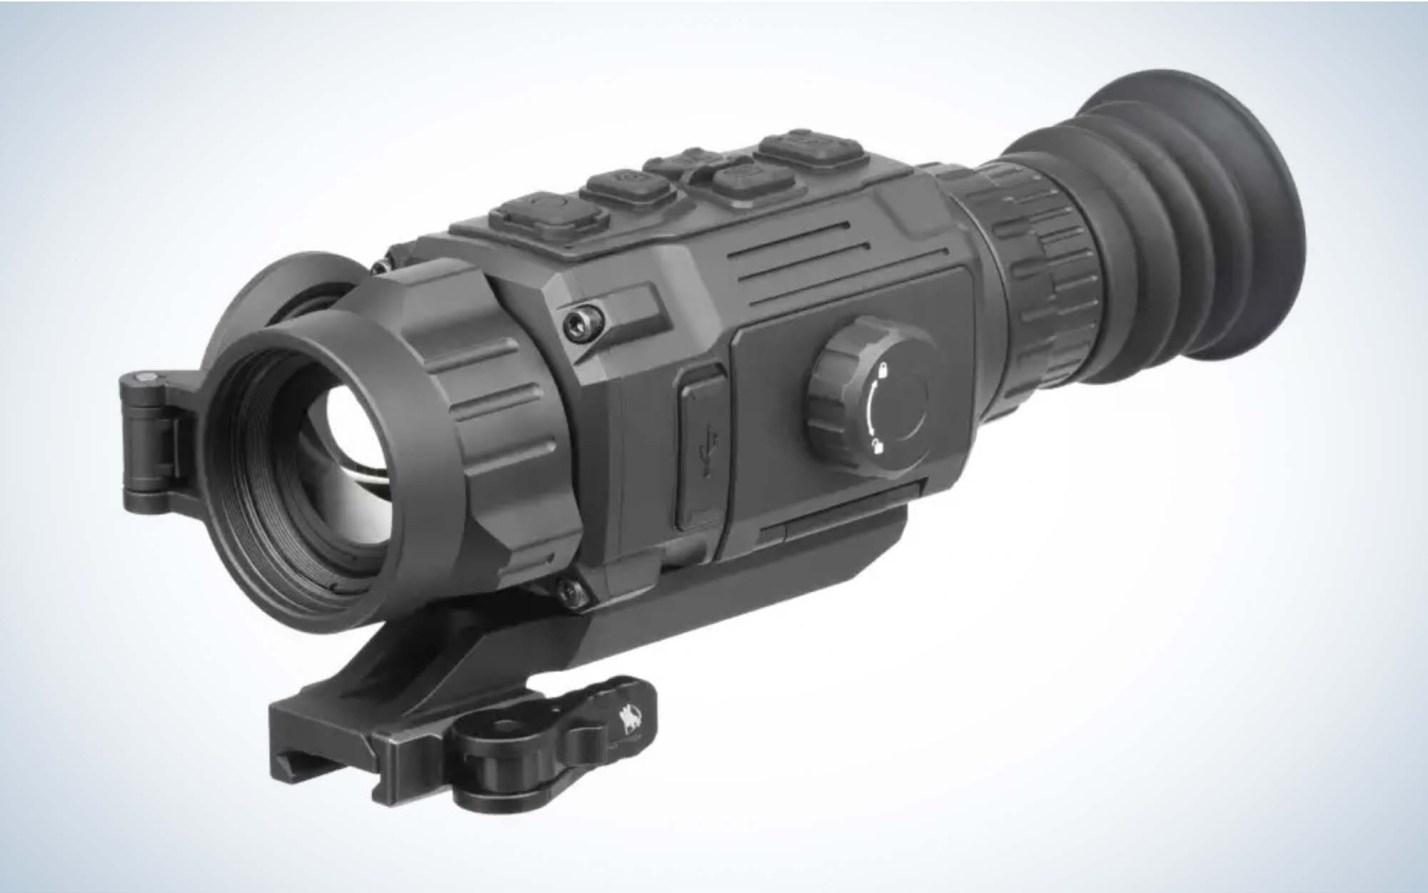 AGM Thermal Scopes and Monoculars on Sale at